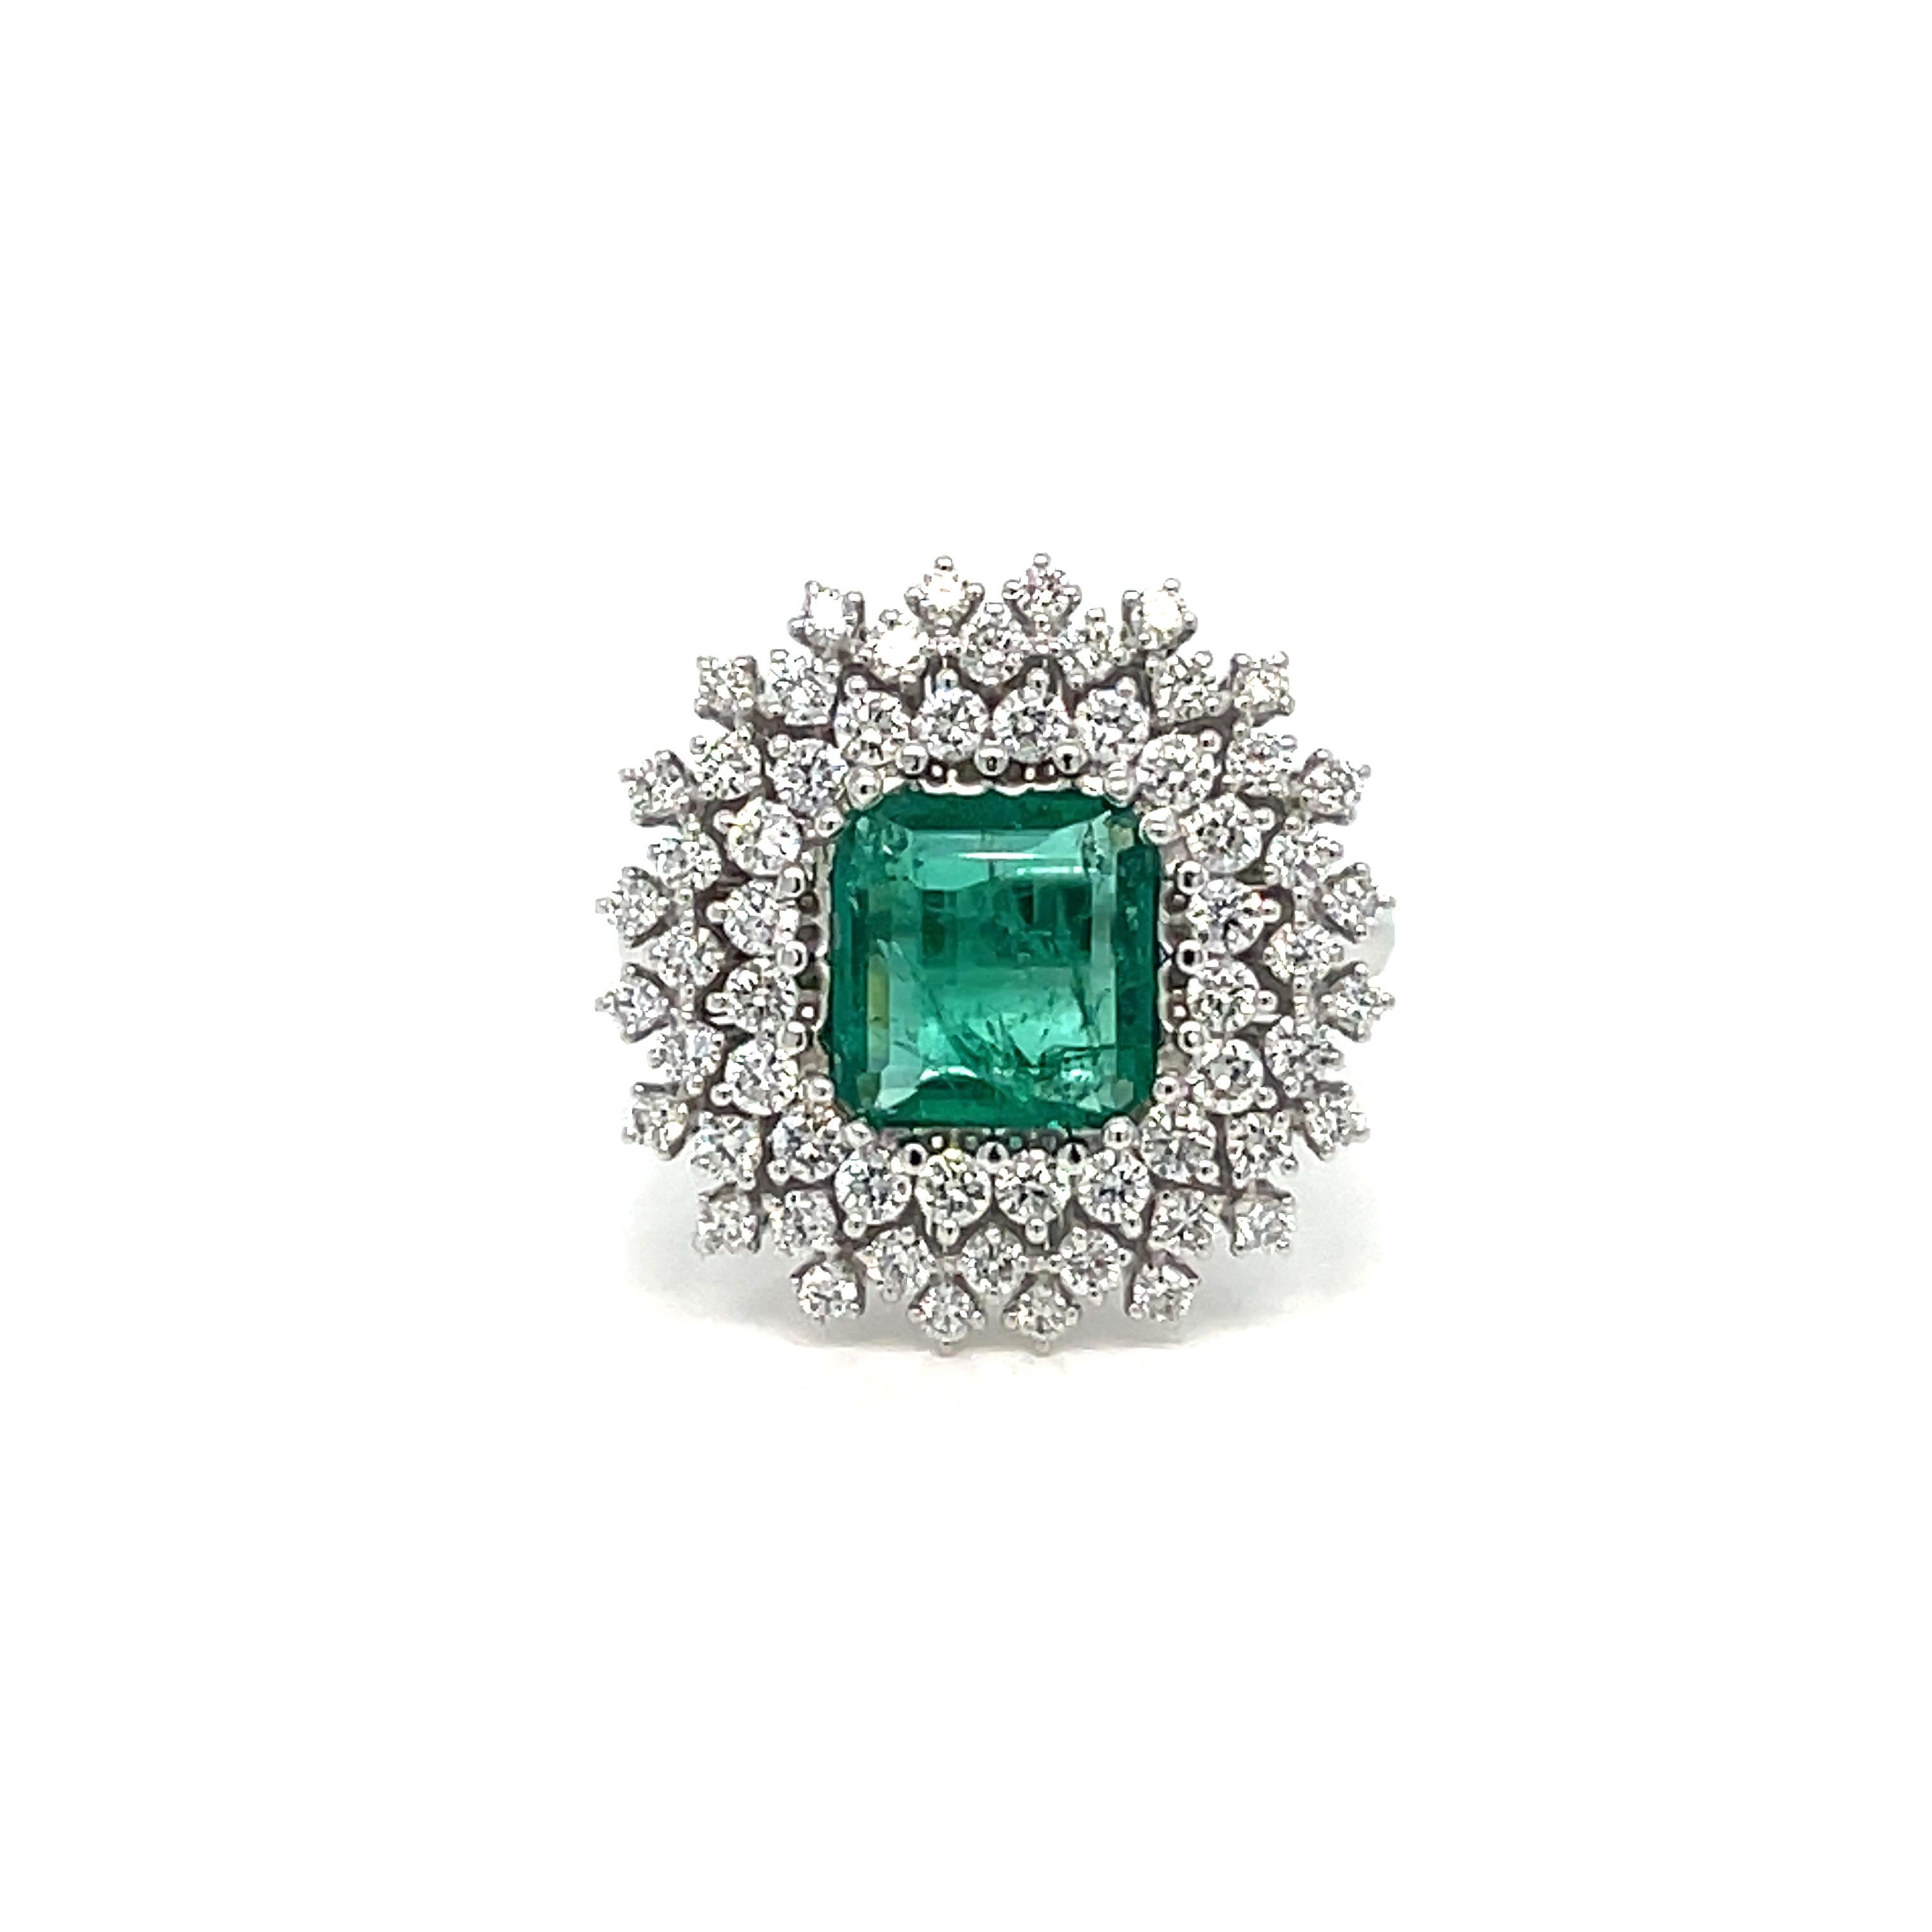 Beautiful cluster ring, hand-crafted in 18k white gold, centering a vivid emerald cut natural Emerald weighing 1.30 carat, Colombia origin, surrounded by 1.00 carat of round brilliant cut diamonds G color VVS. 
Origin Italy circa 1980

CONDITION: